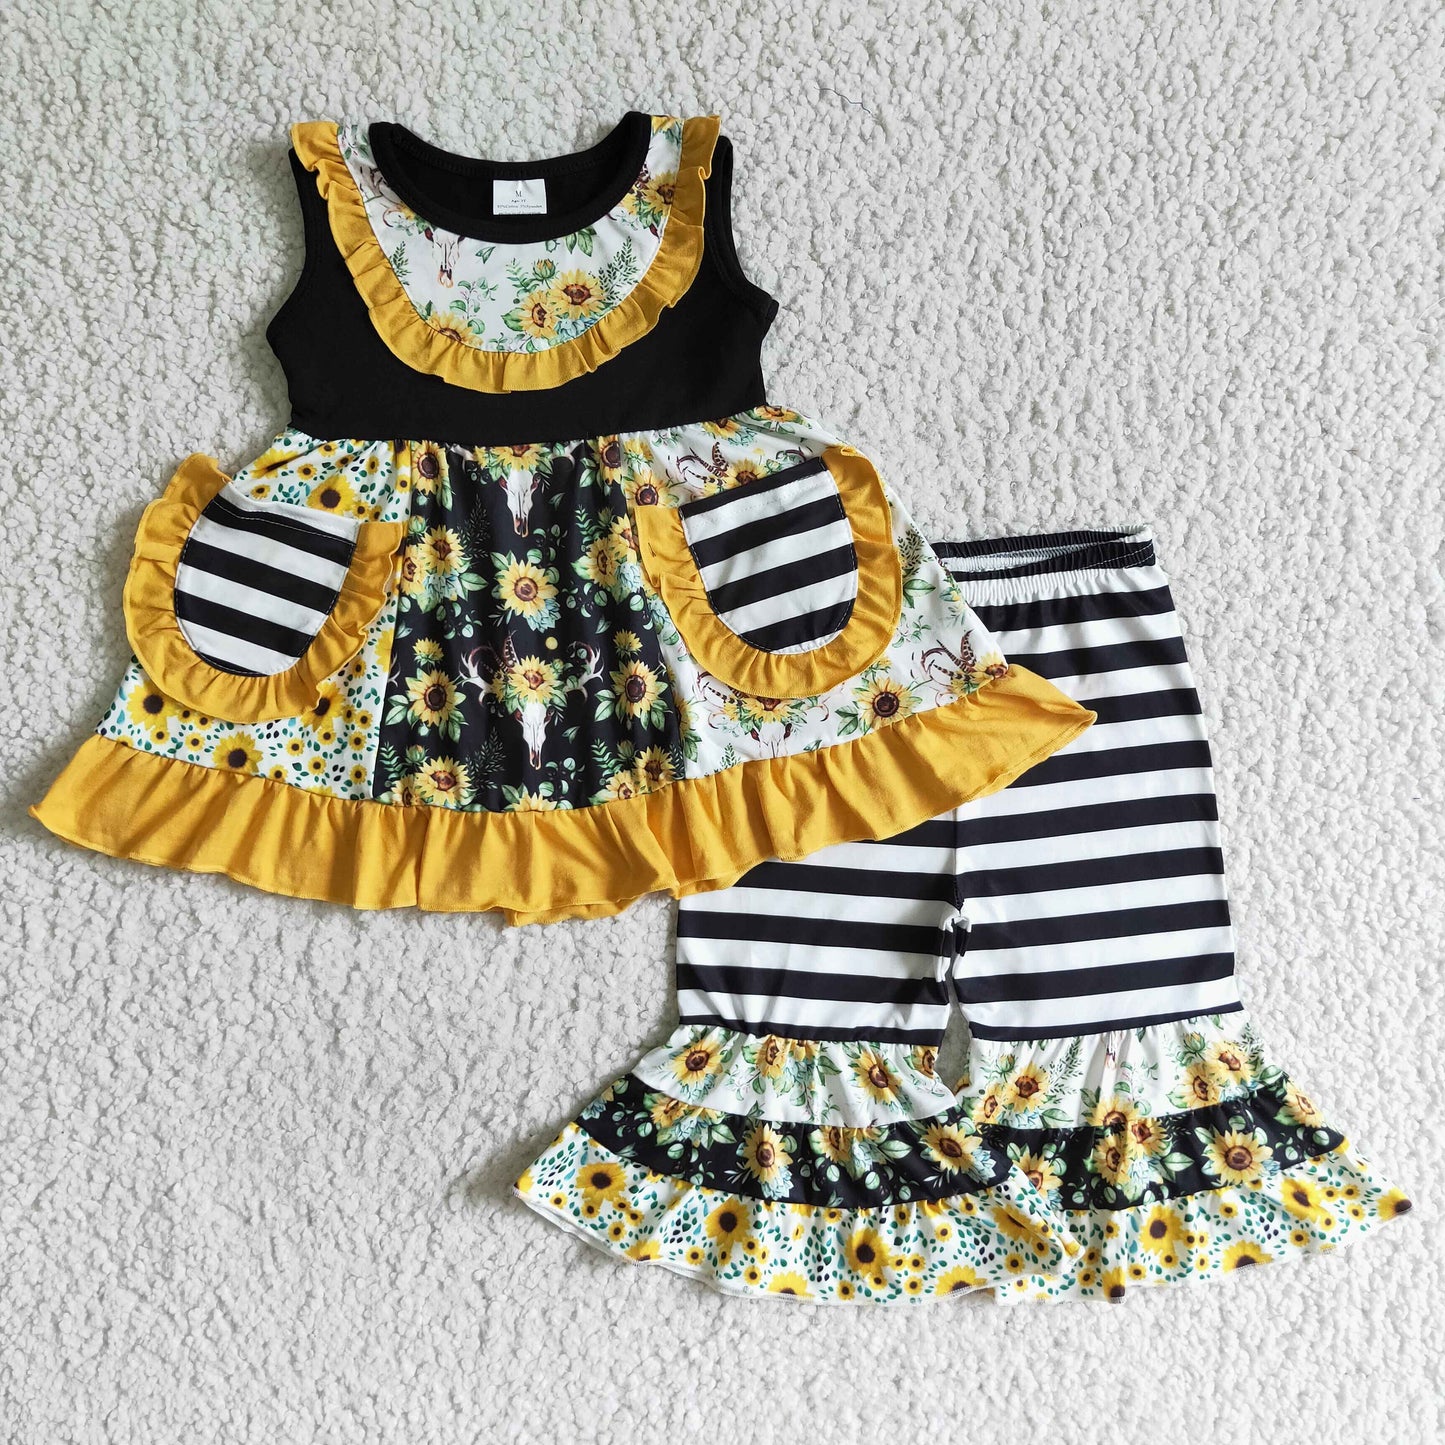 A6-15 girl summer sleeveless pockets top match stripes and sunflowers pattern stitching pants